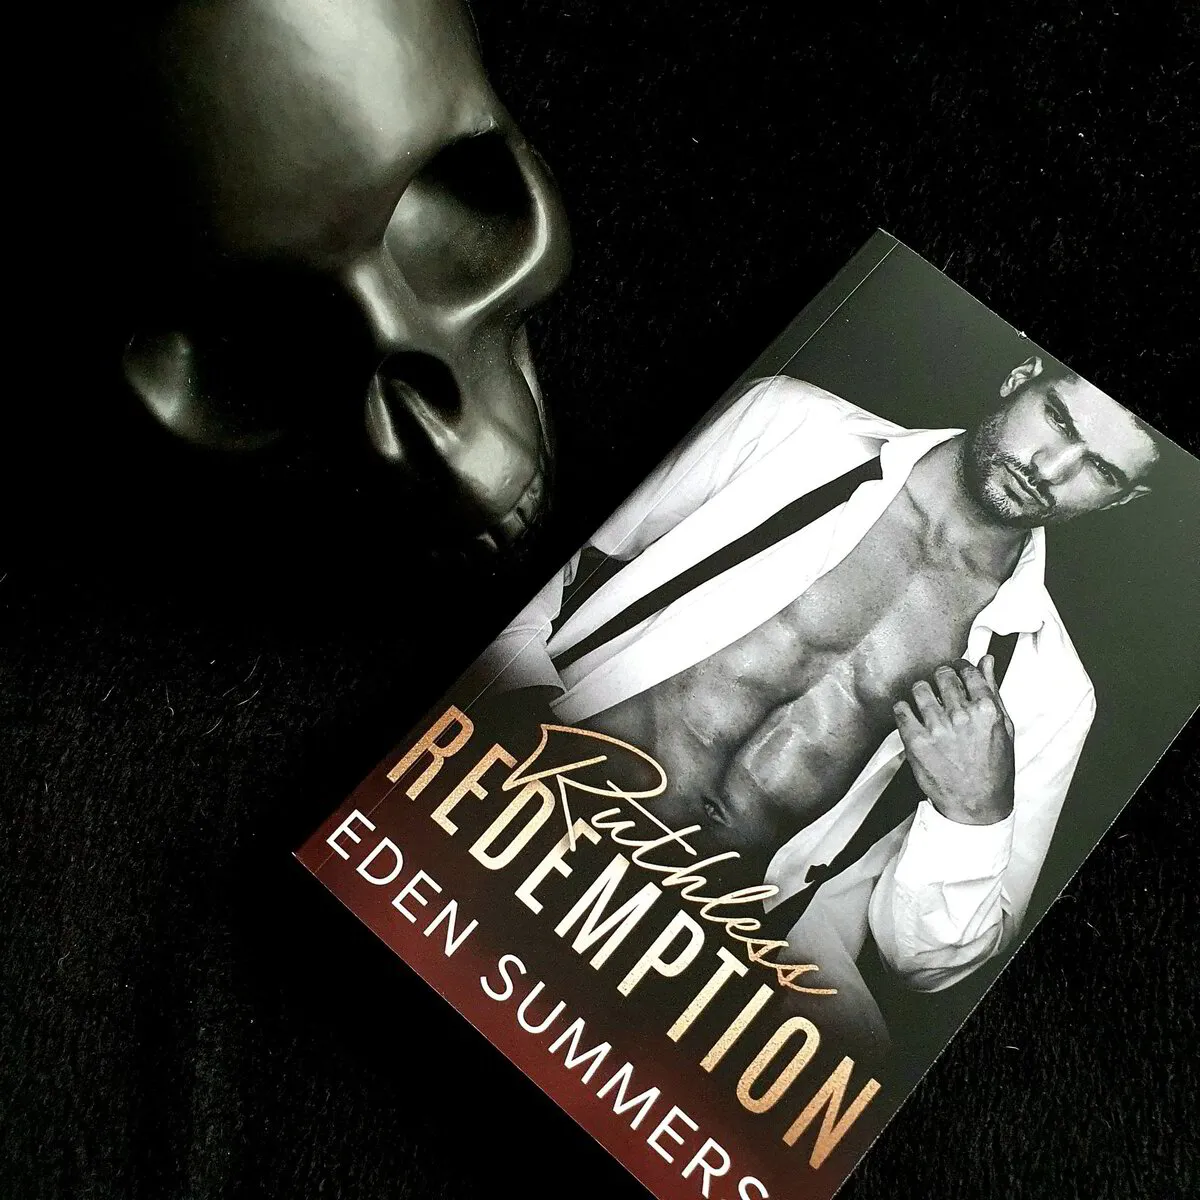 Signed Print Copy of Ruthless Redemption (Hunting Her #8)